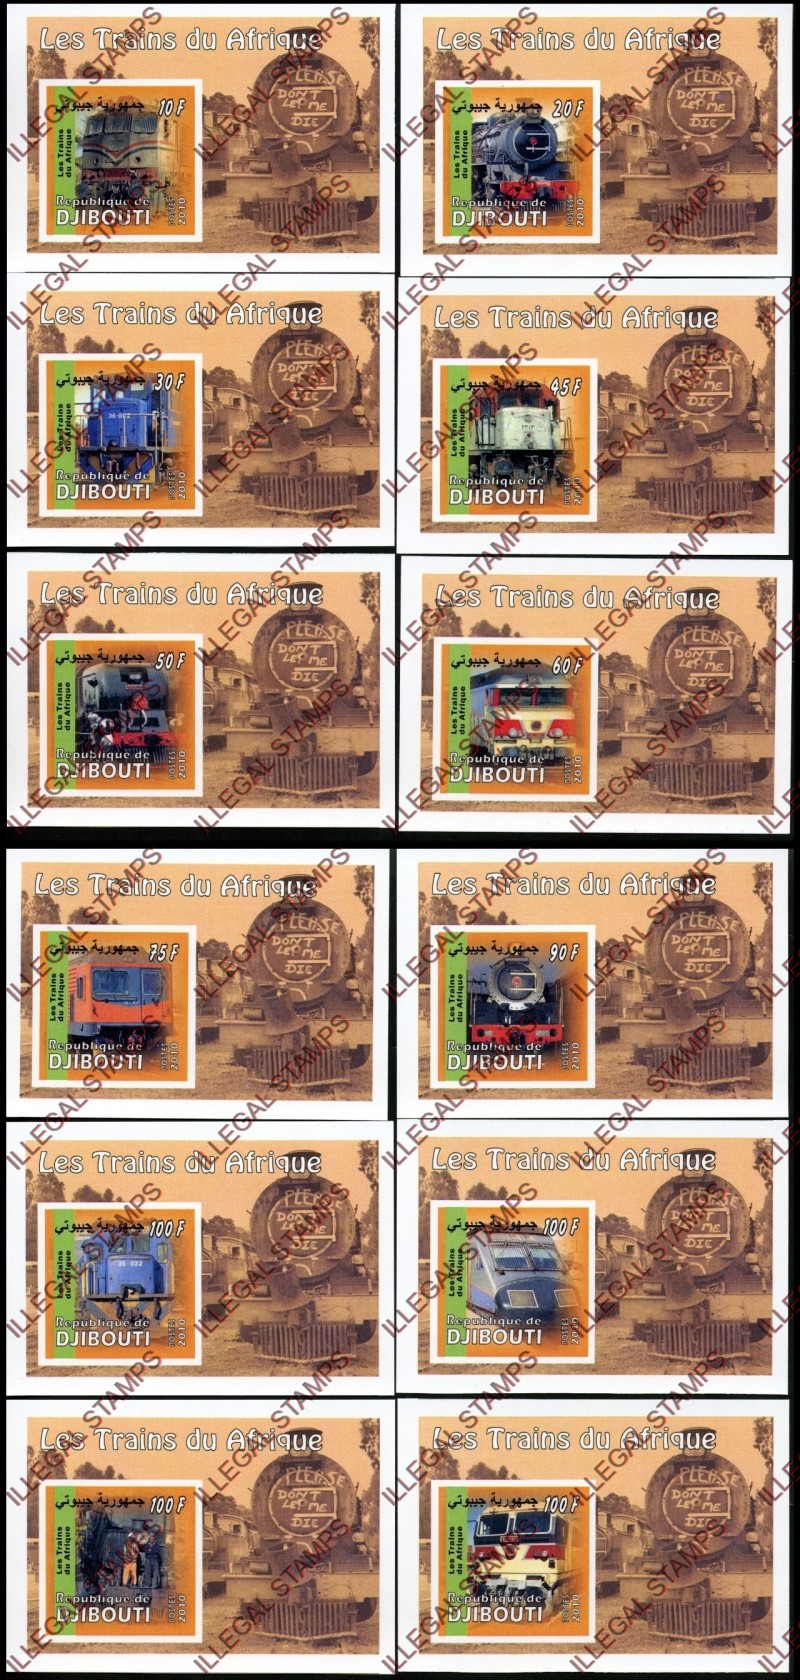 Djibouti 2010 African Trains Illegal Stamp Deluxe Souvenir Sheets of 1